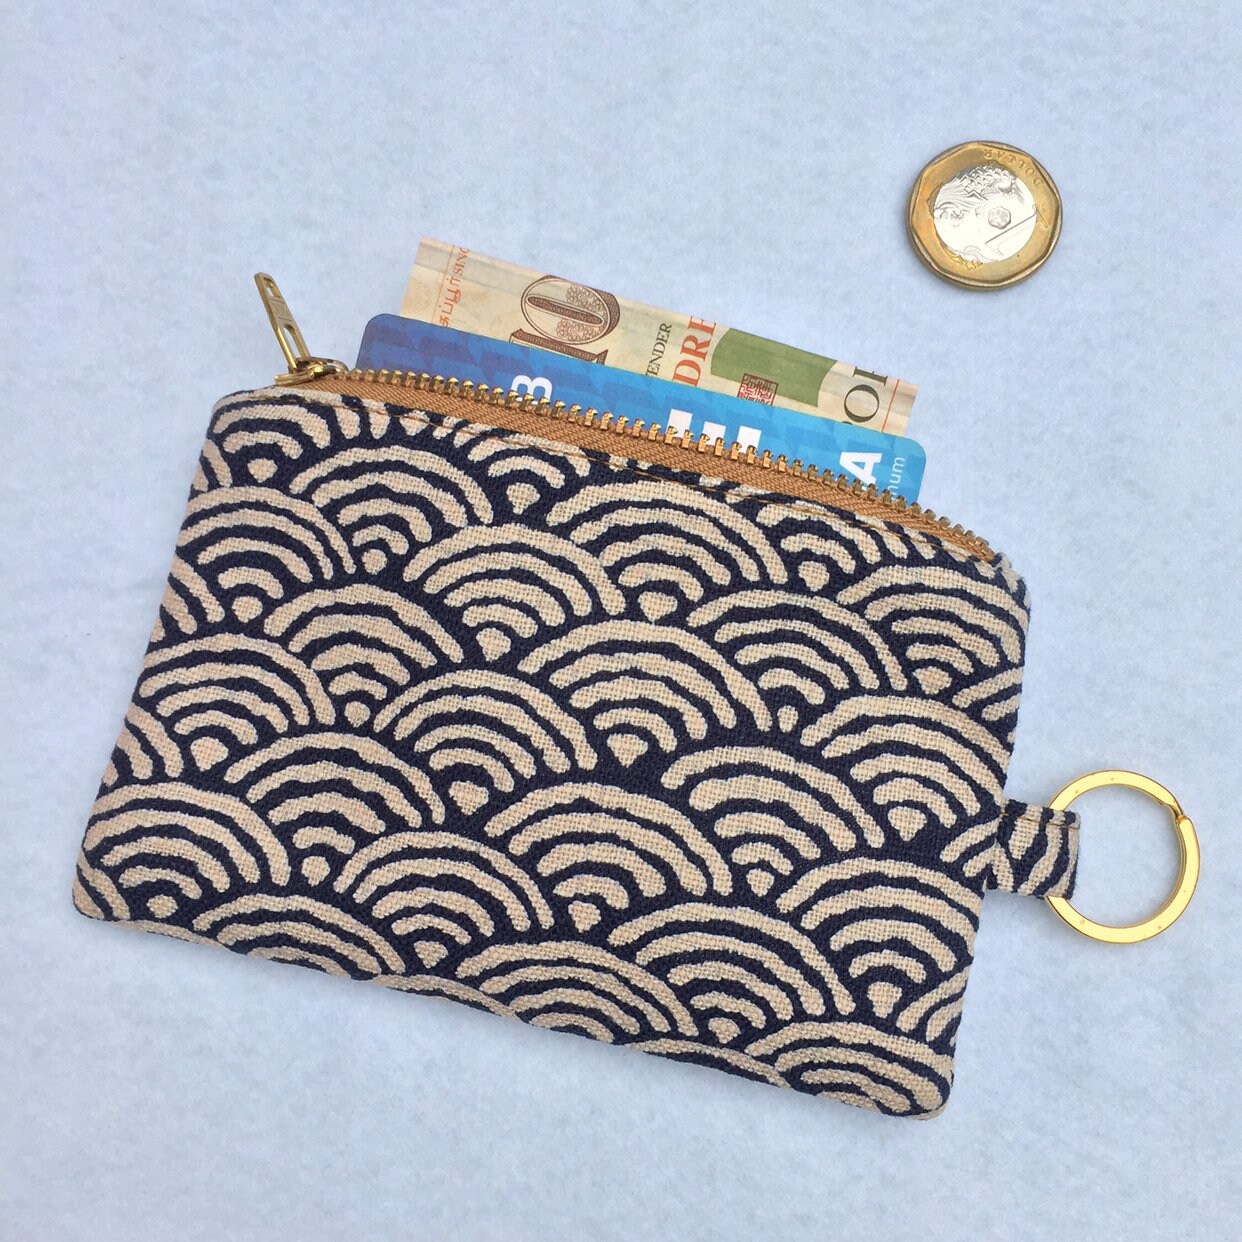 Set of 2 Holder Keychain Wallets with Zipper for Men and Women. Small Canvas Coin Pouch with Key ring.Gift for Dad, Boyfriend, Husband.